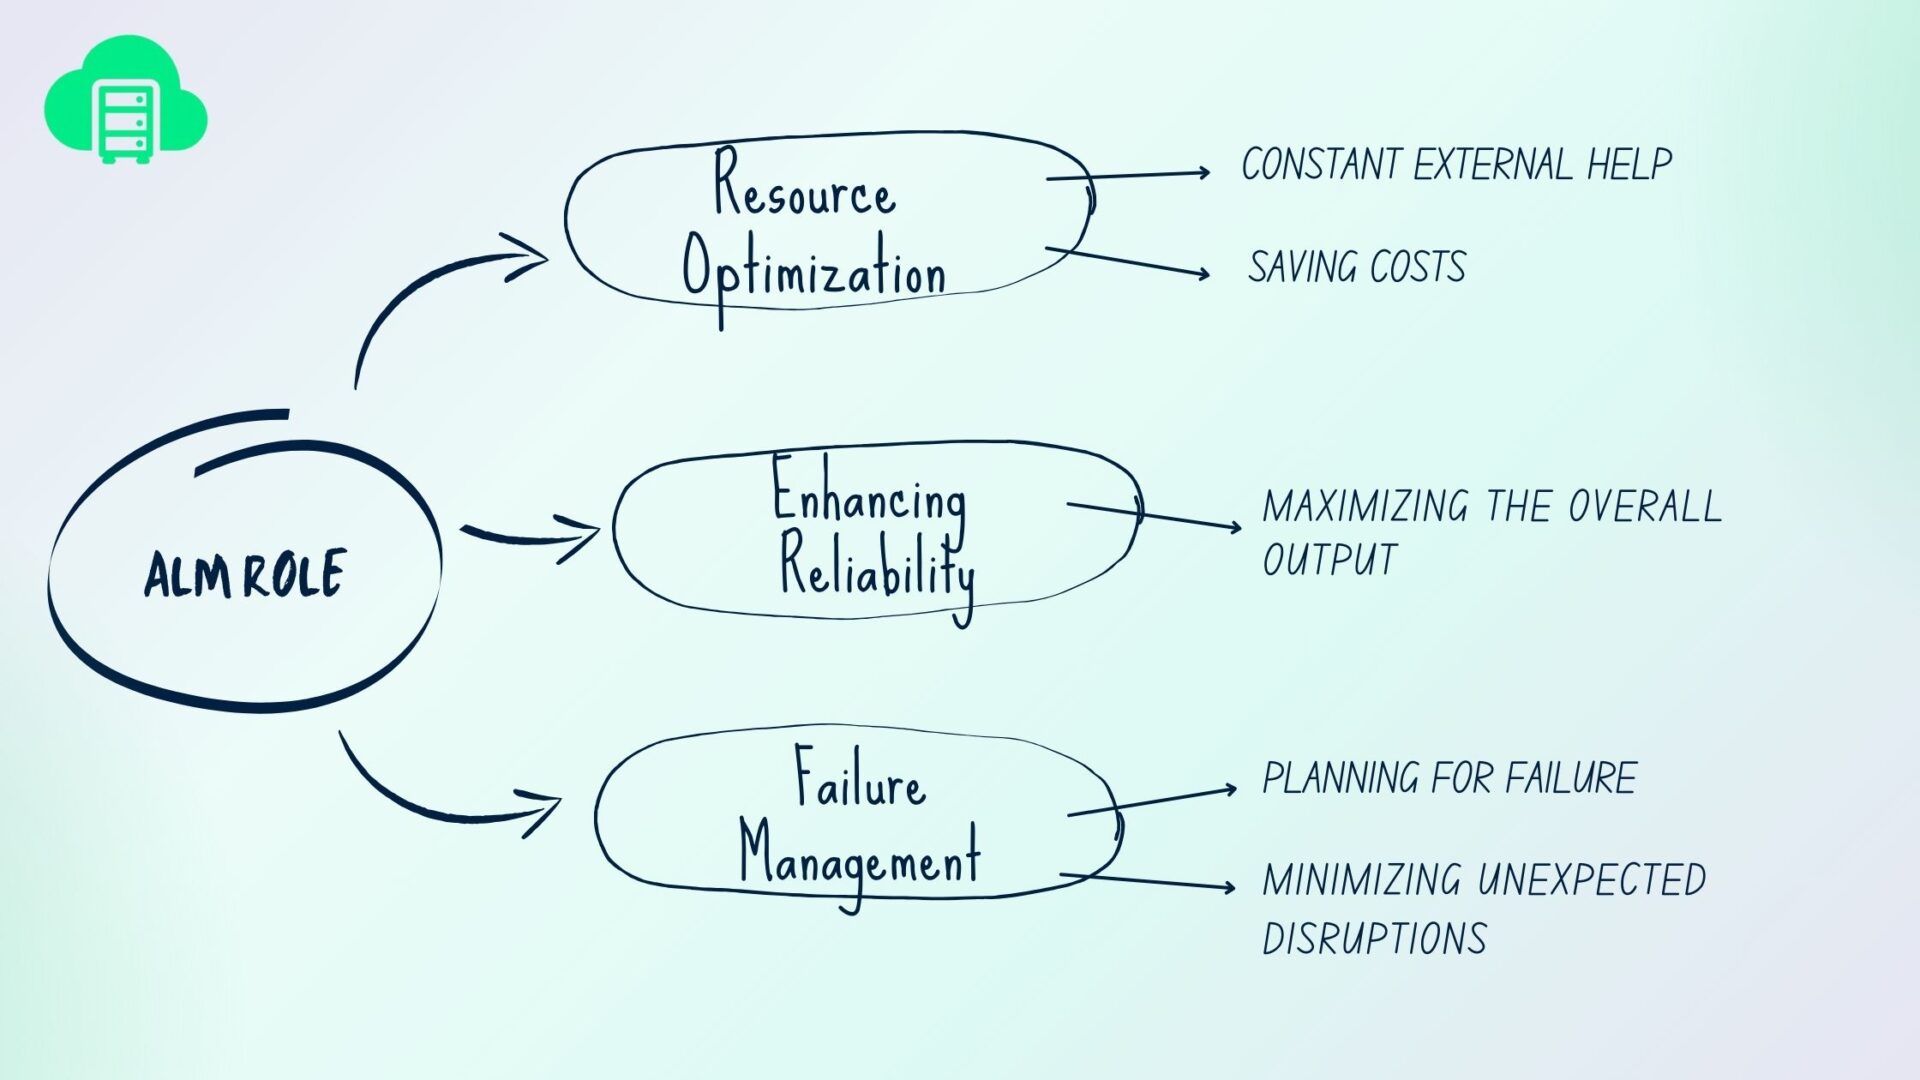 Asset lifecycle management is important in 3 aspects